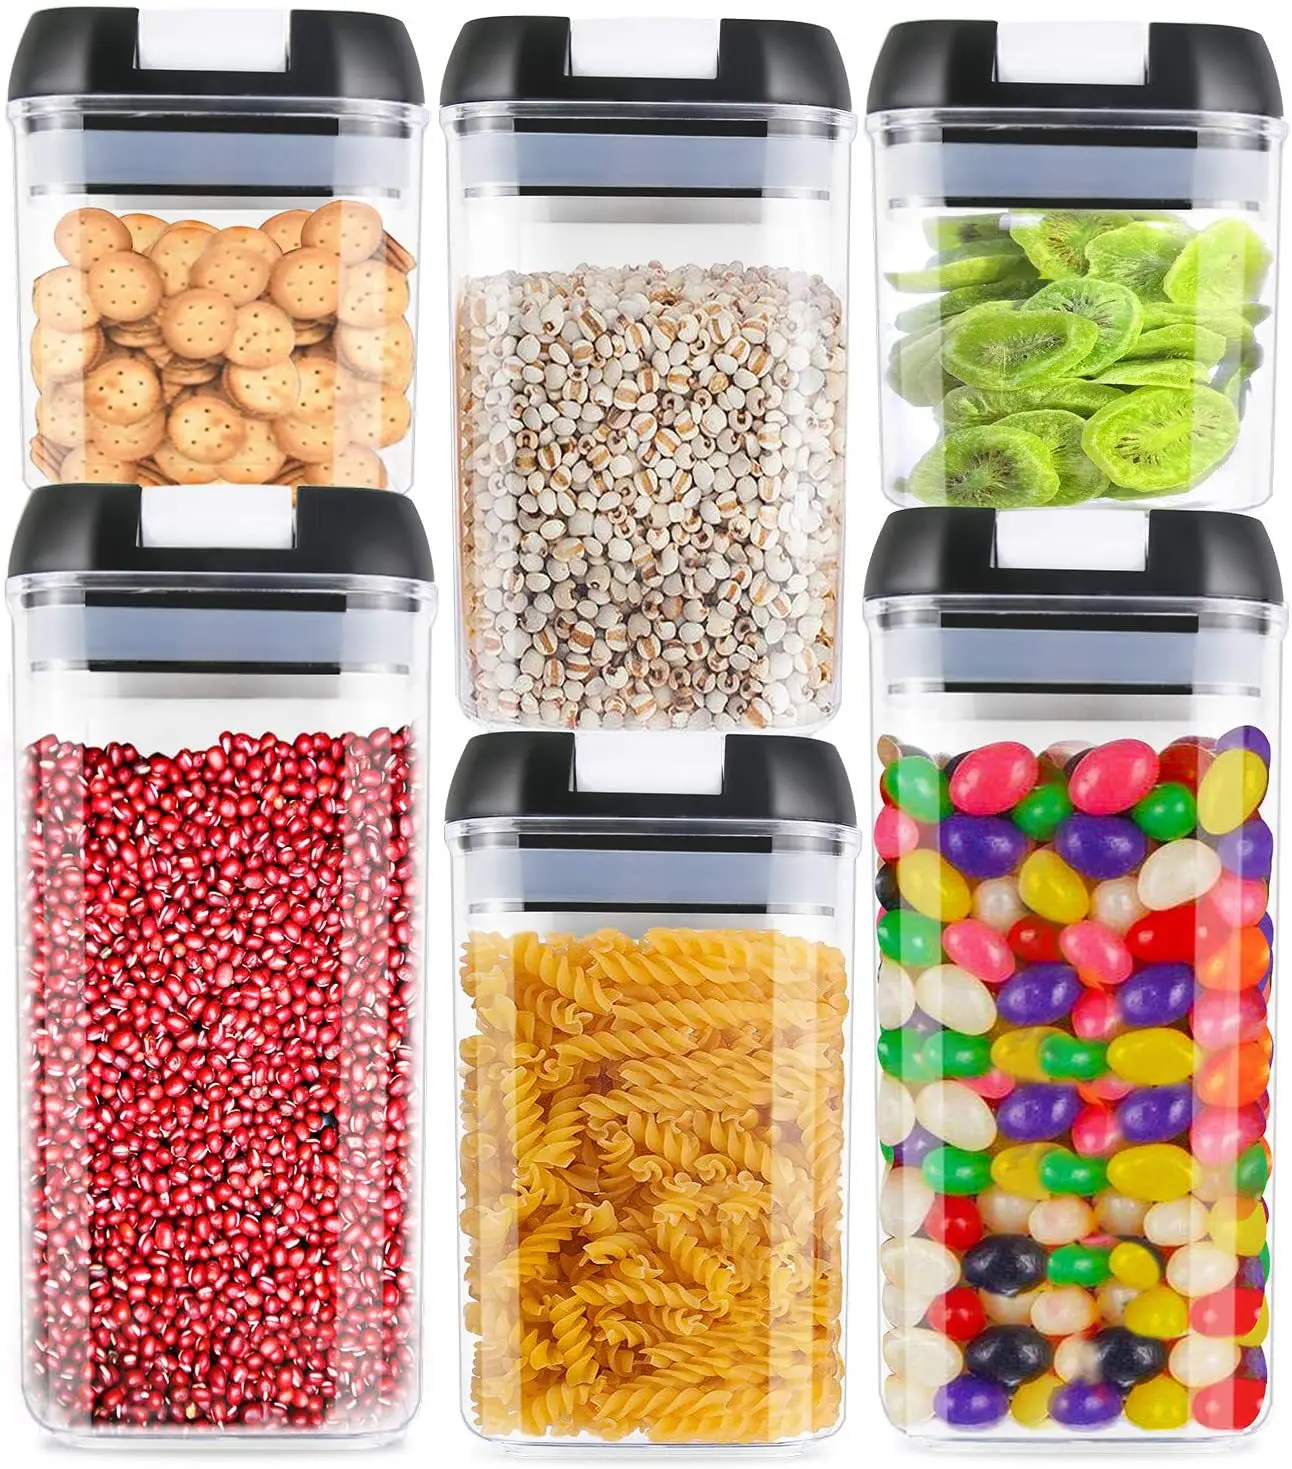 PRAKI Airtight Food Storage Container Set - 16 Pcs, BPA Free Plastic Dry  Food Canisters for Kitchen Pantry Organization and Storage Ideal for  Cereal